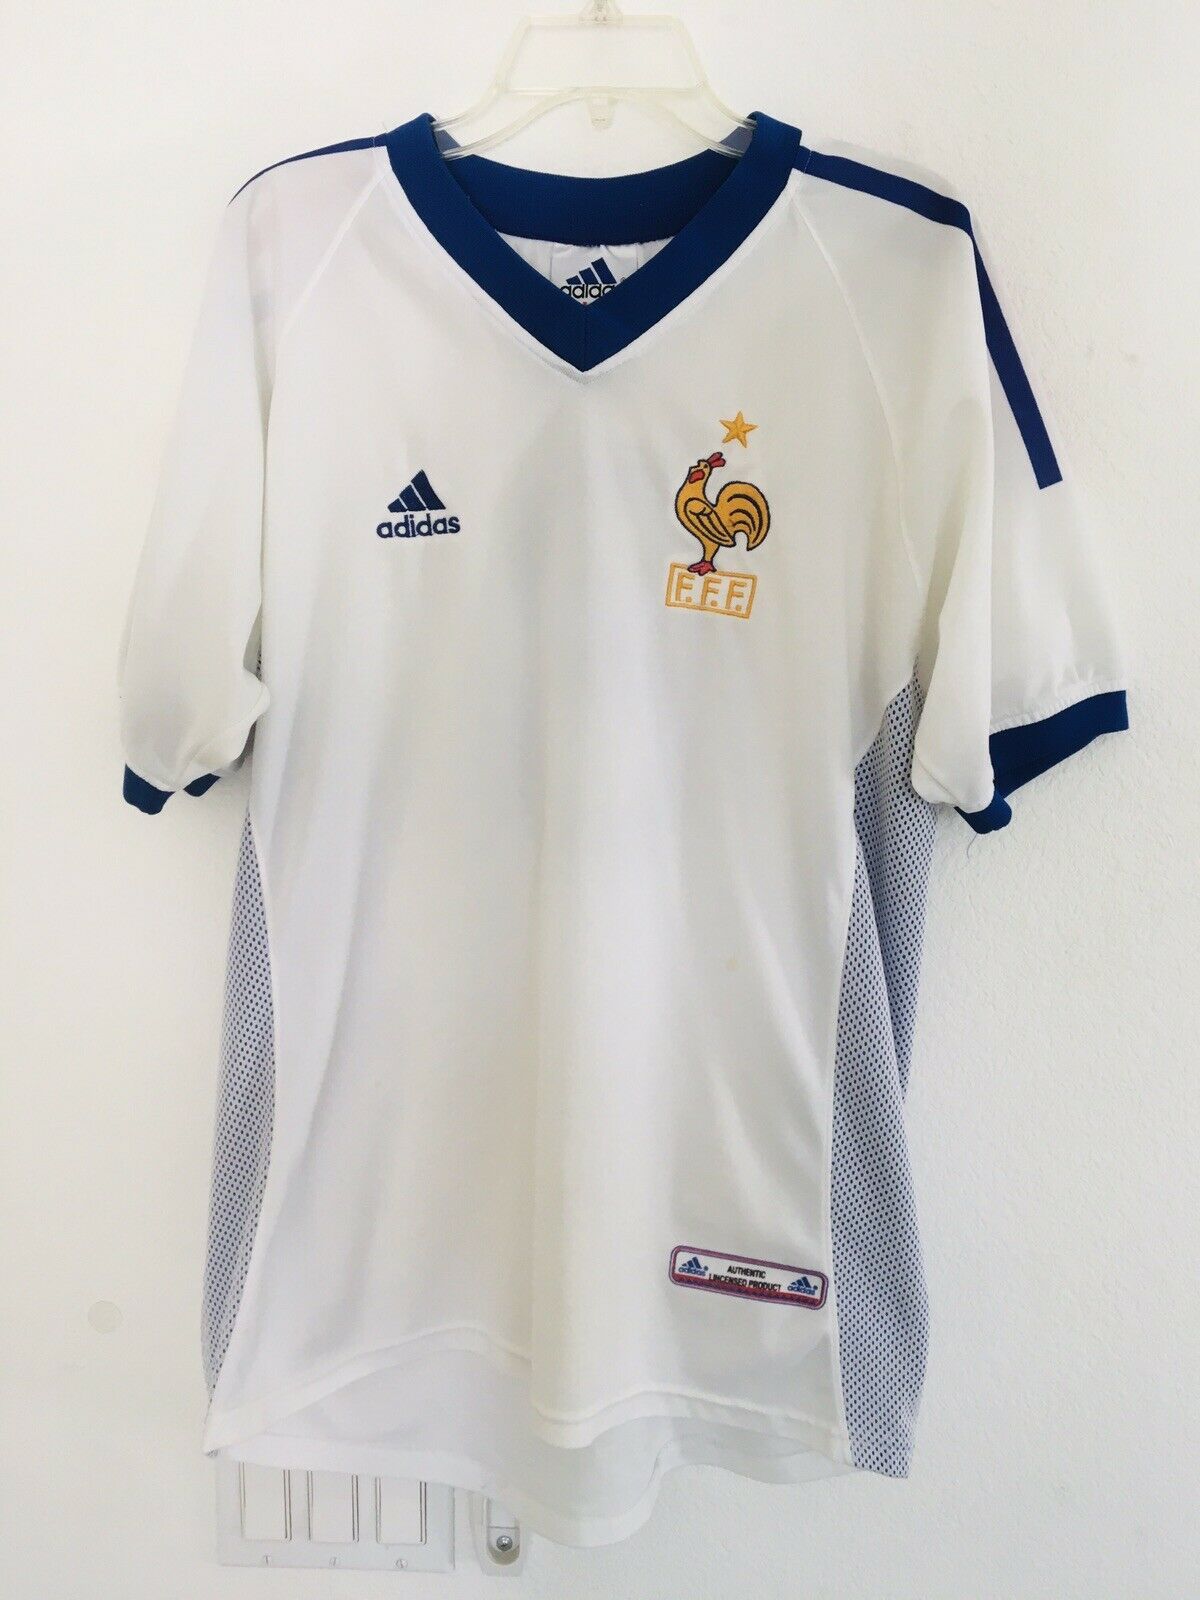 Adidas France FFF Soccer Jersey White Blue Men's Size Small  Authentic Licensed - $33.25